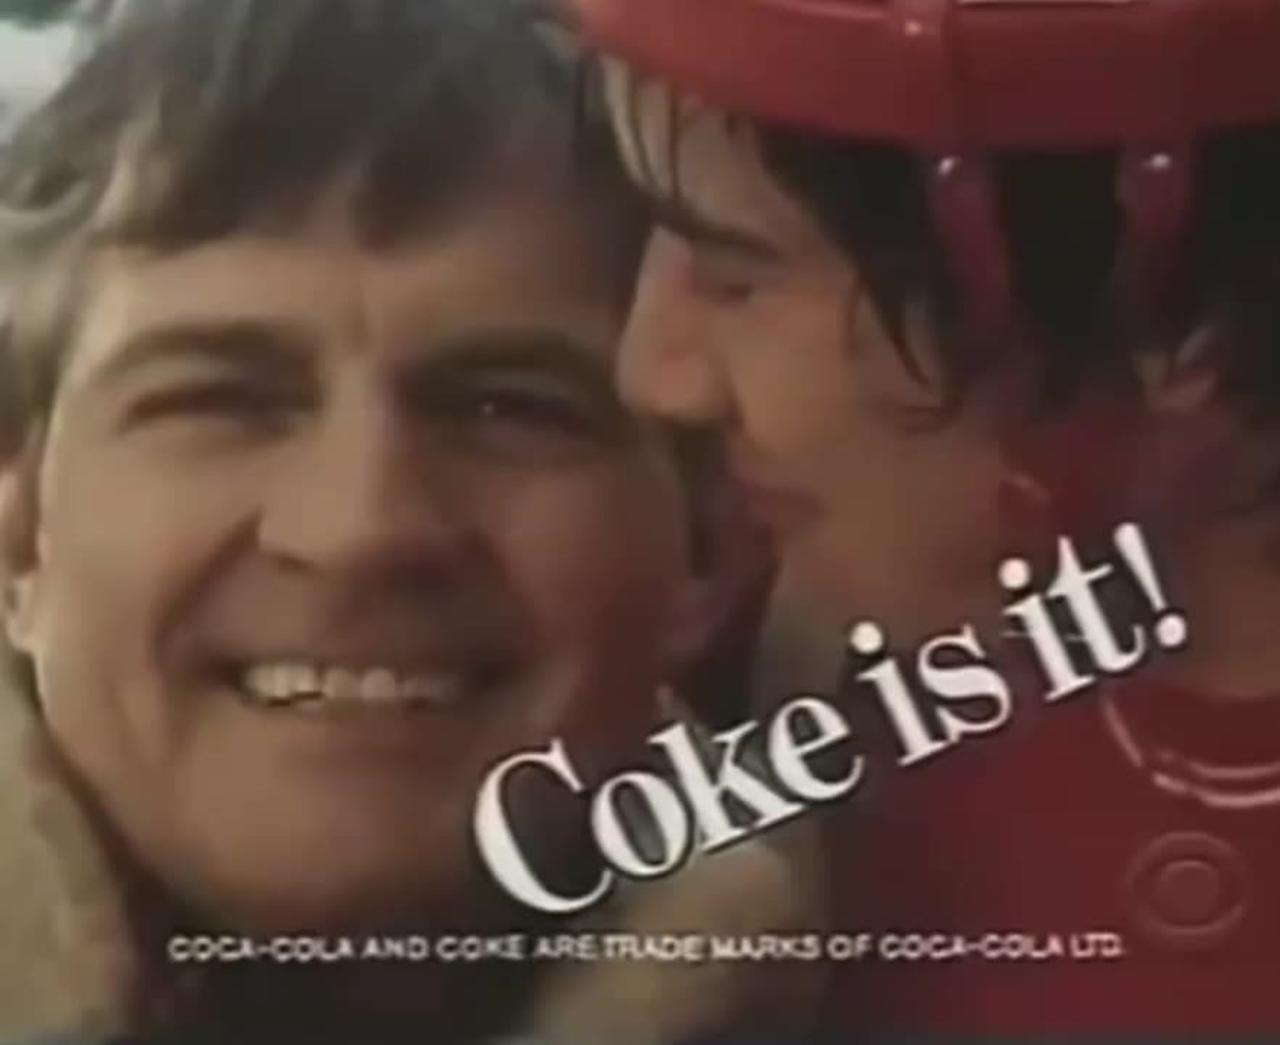 A 19 year old Keanu Reeves in a Coca Cola commercial from 1983